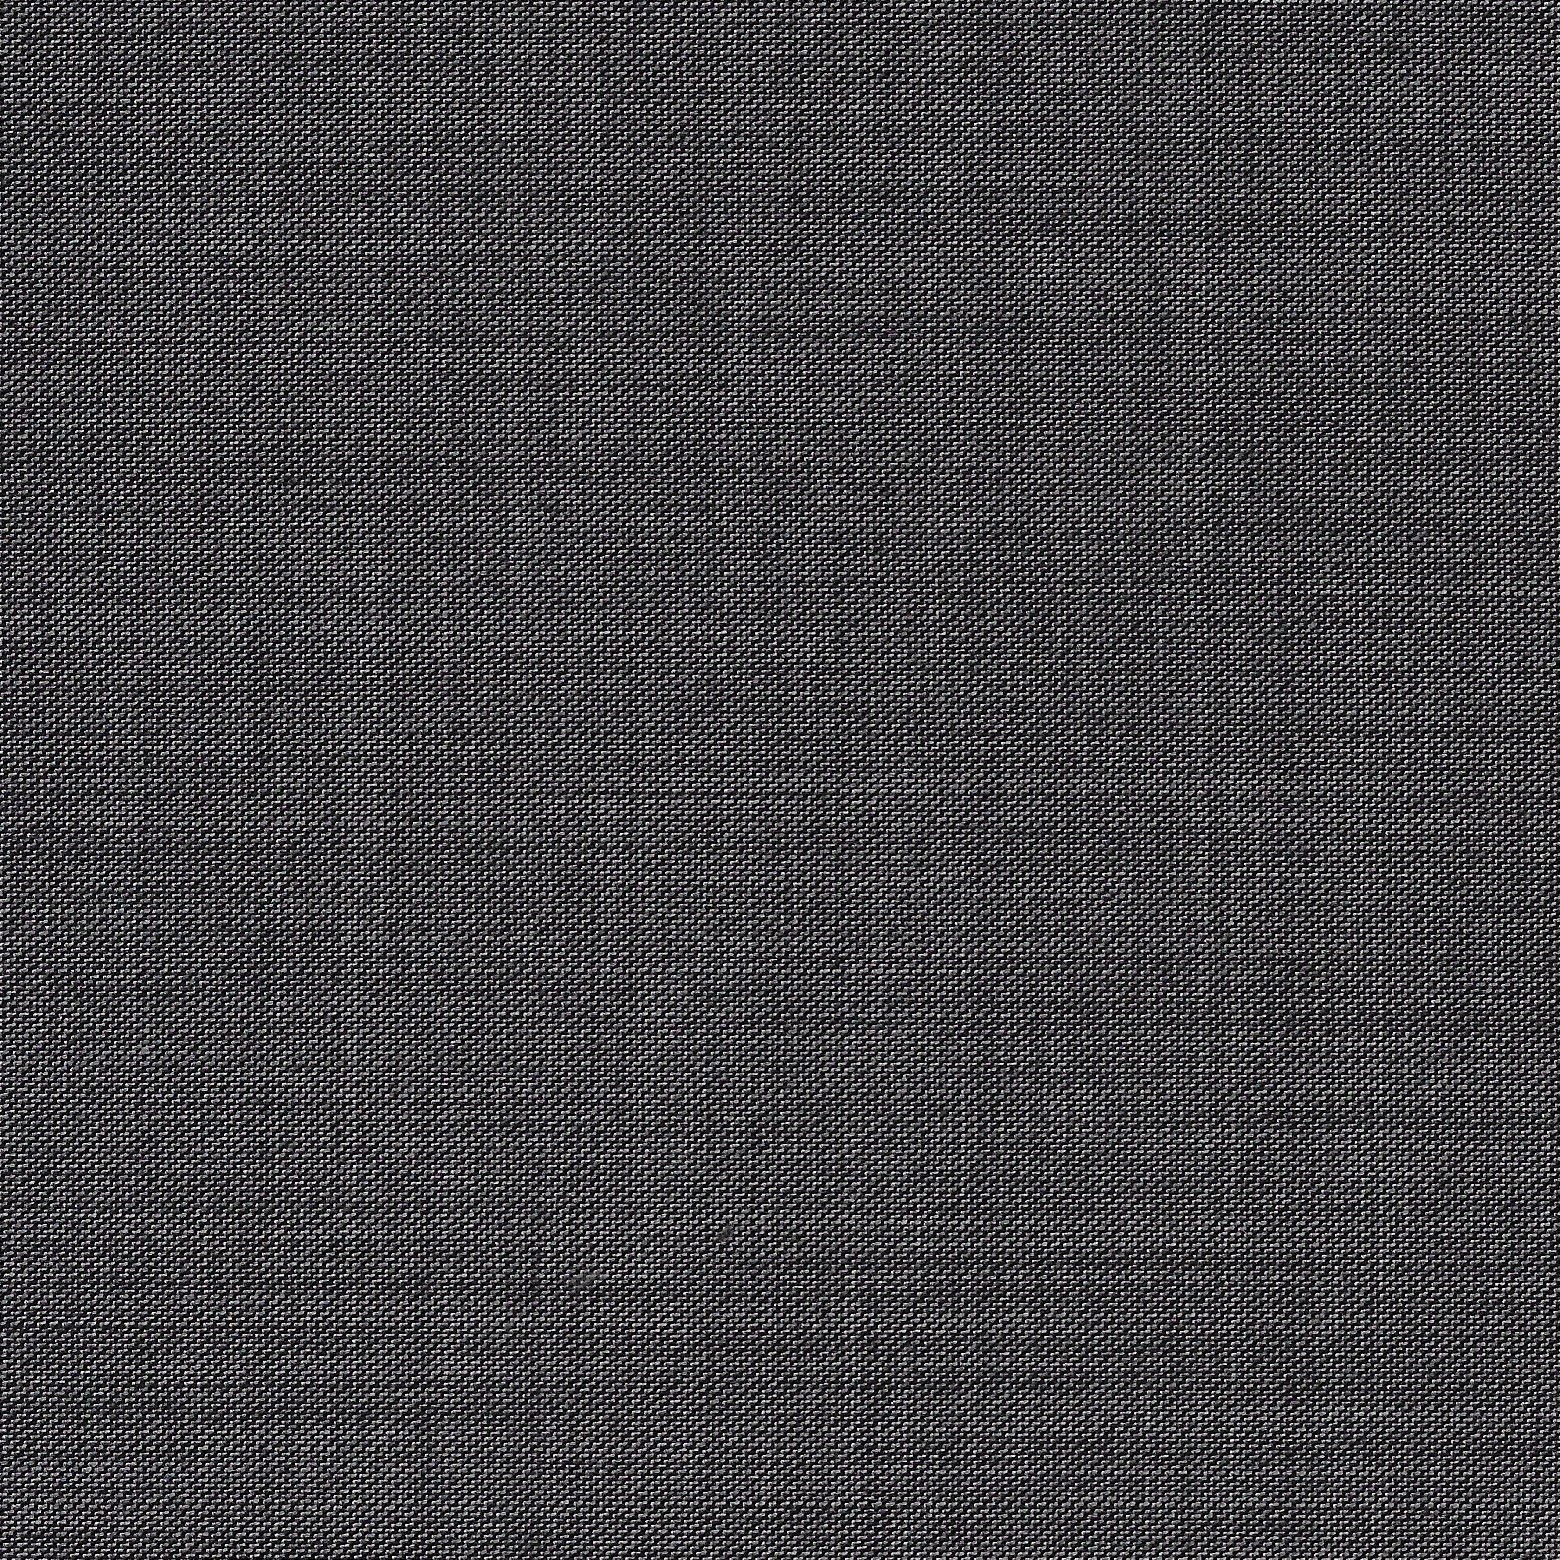 Holland and Sherry Mille Miglia Super 140s Pure Wool Grey - James Hardinge